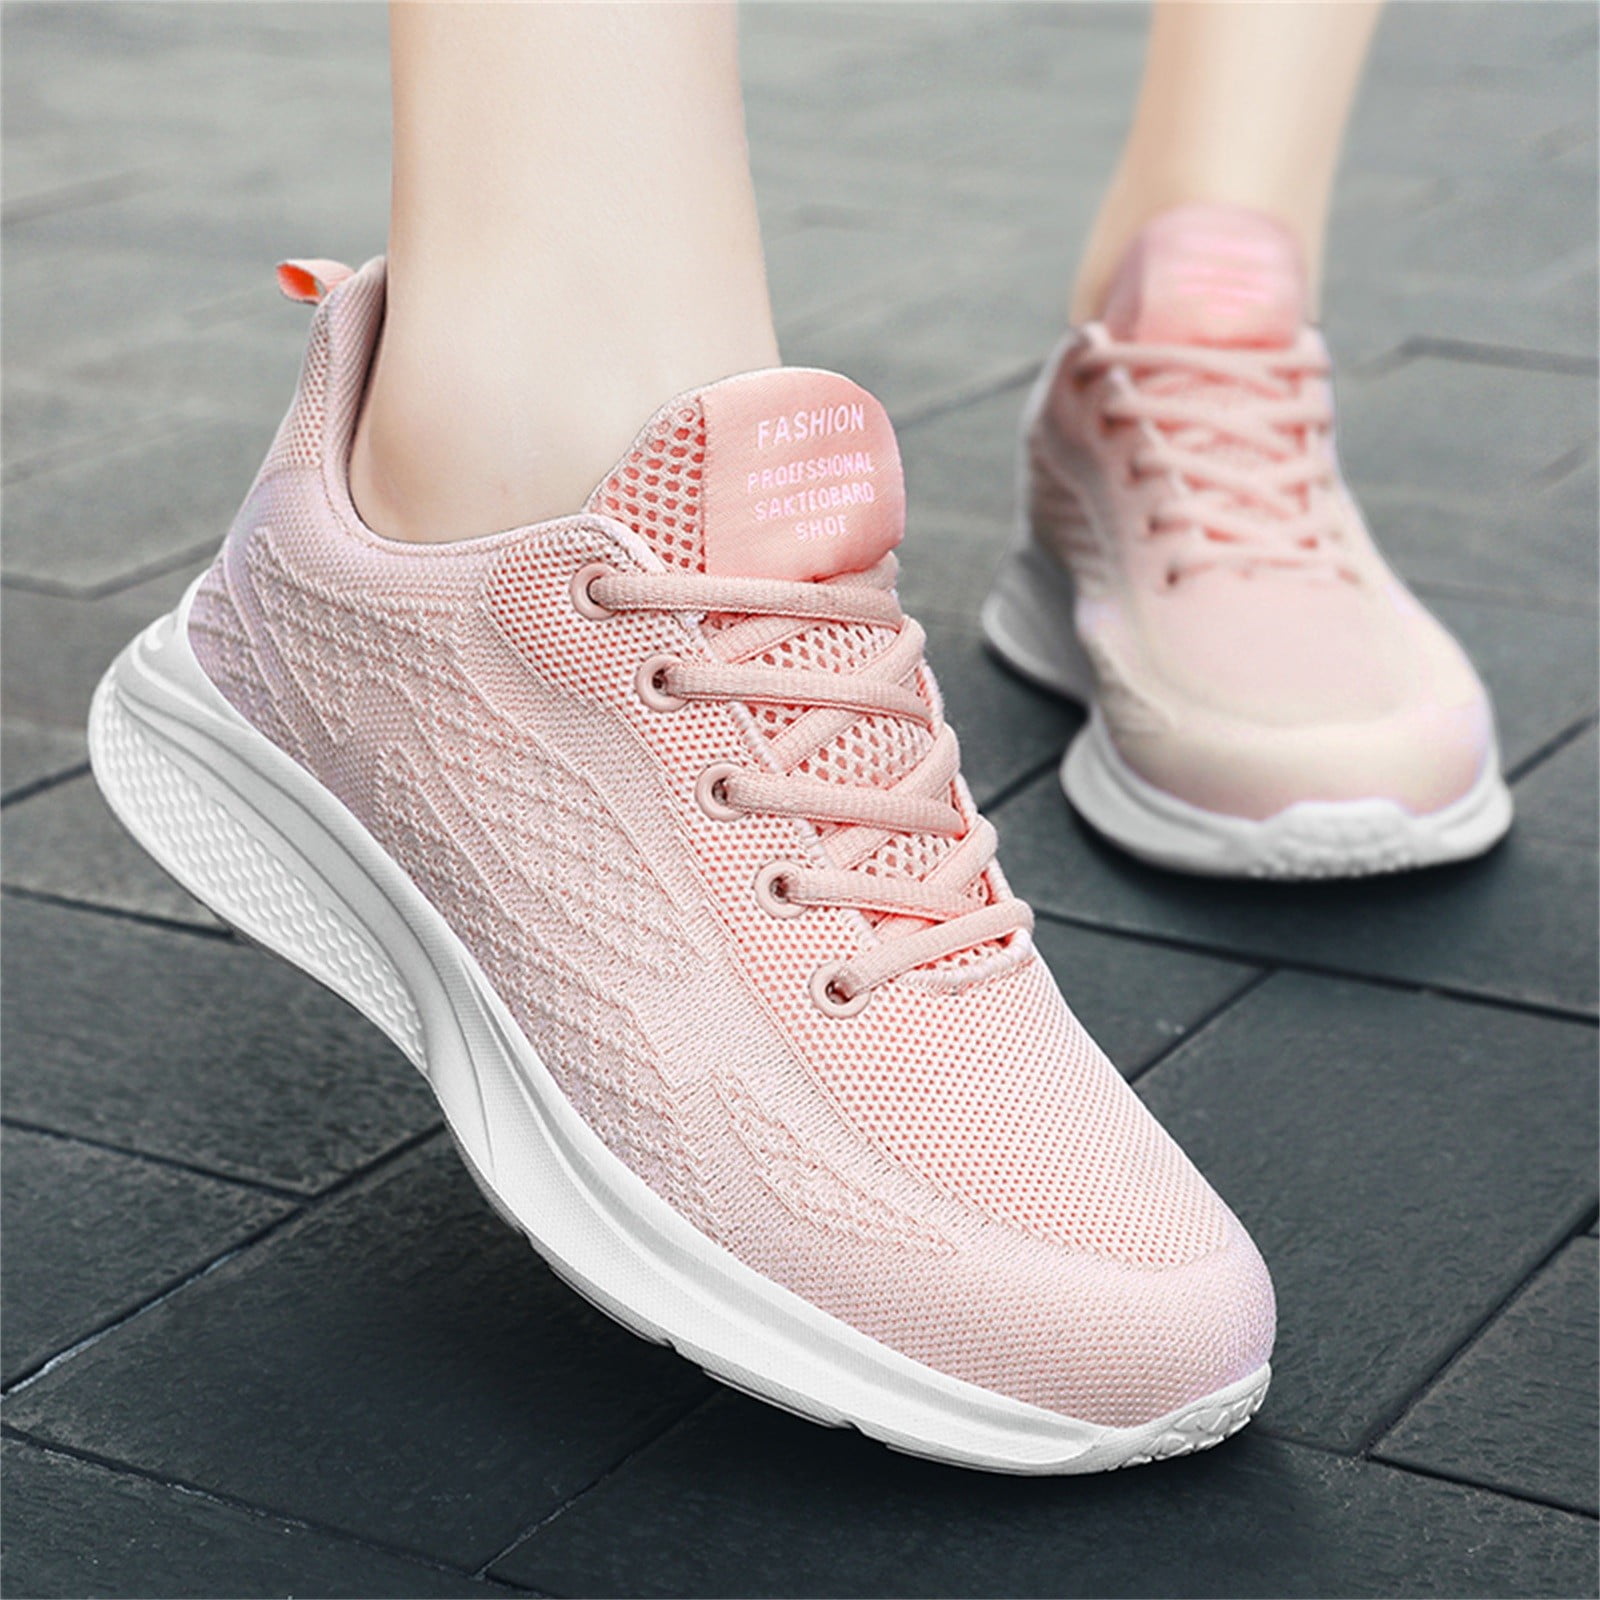 Hey ladies thoughs on sneakers without laces? I am... | Fishbowl